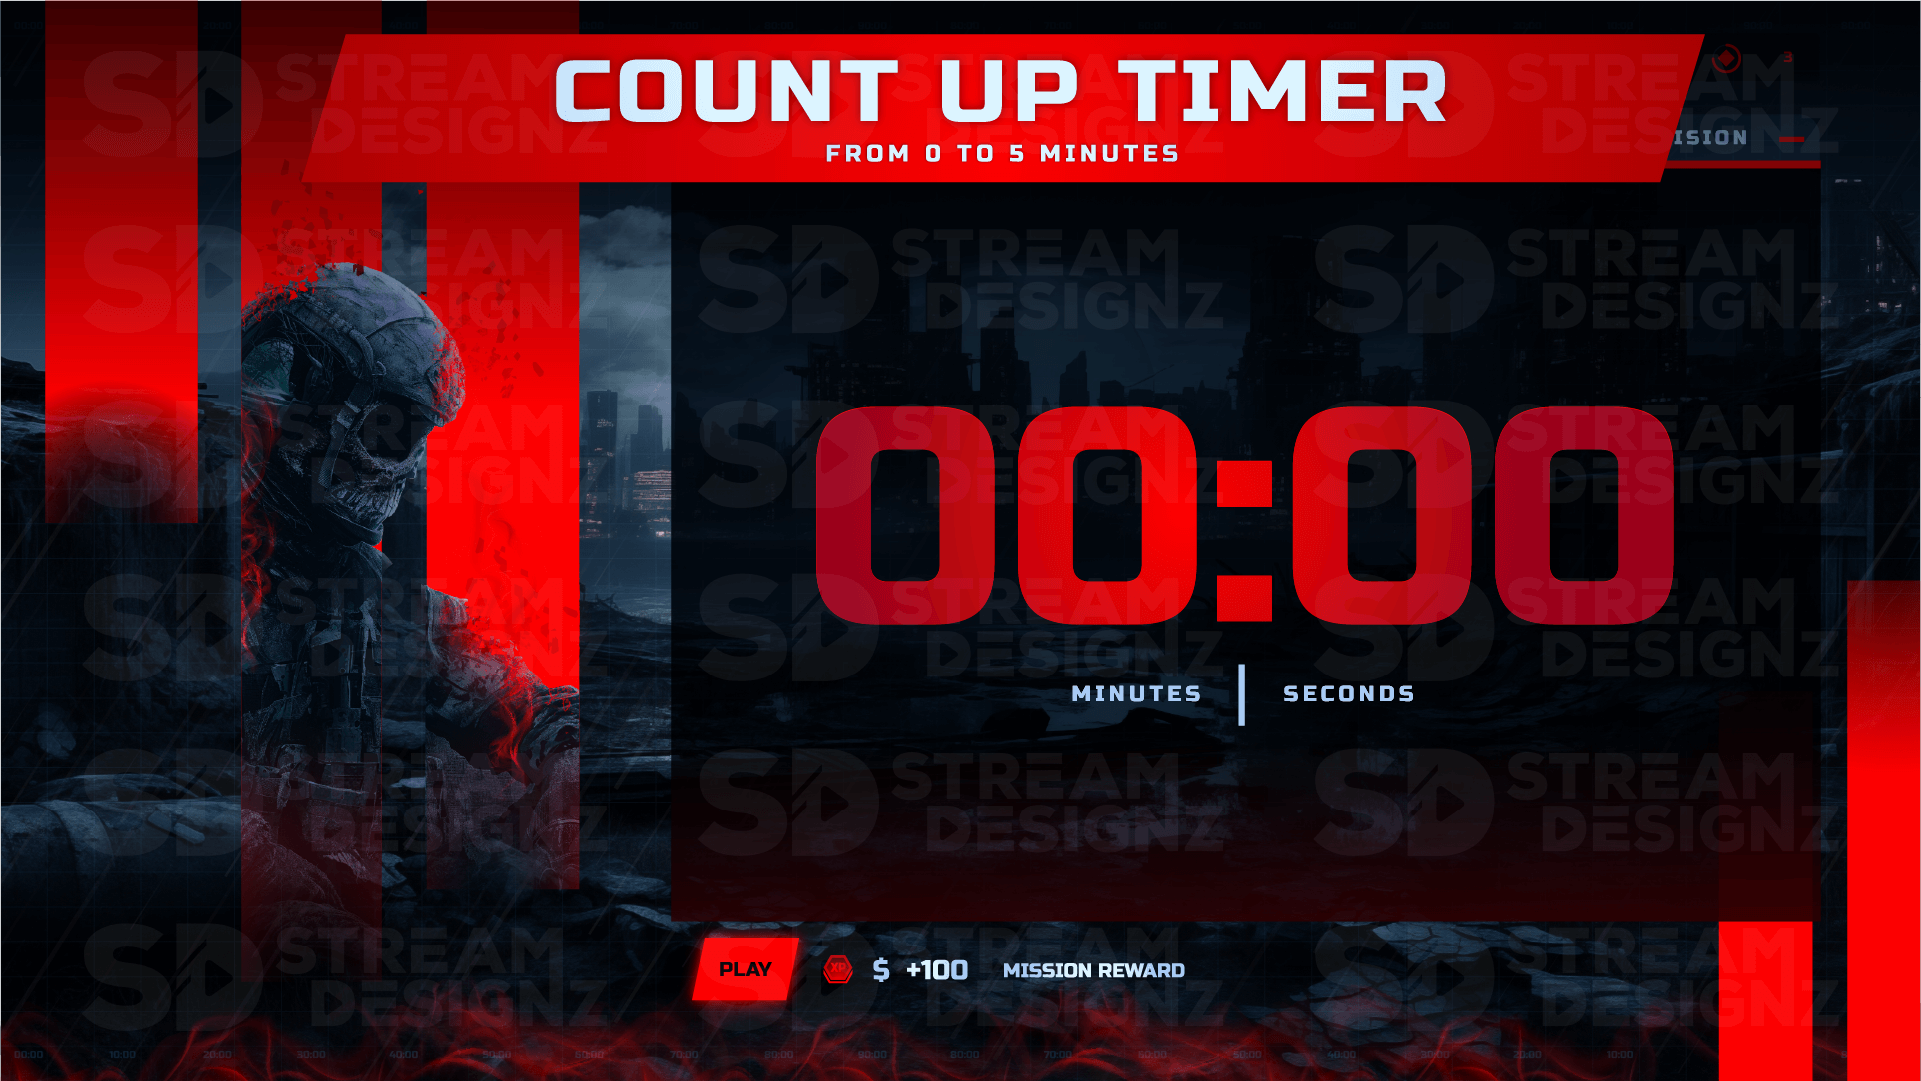 5 minute count up timer preview video loadout stream designz